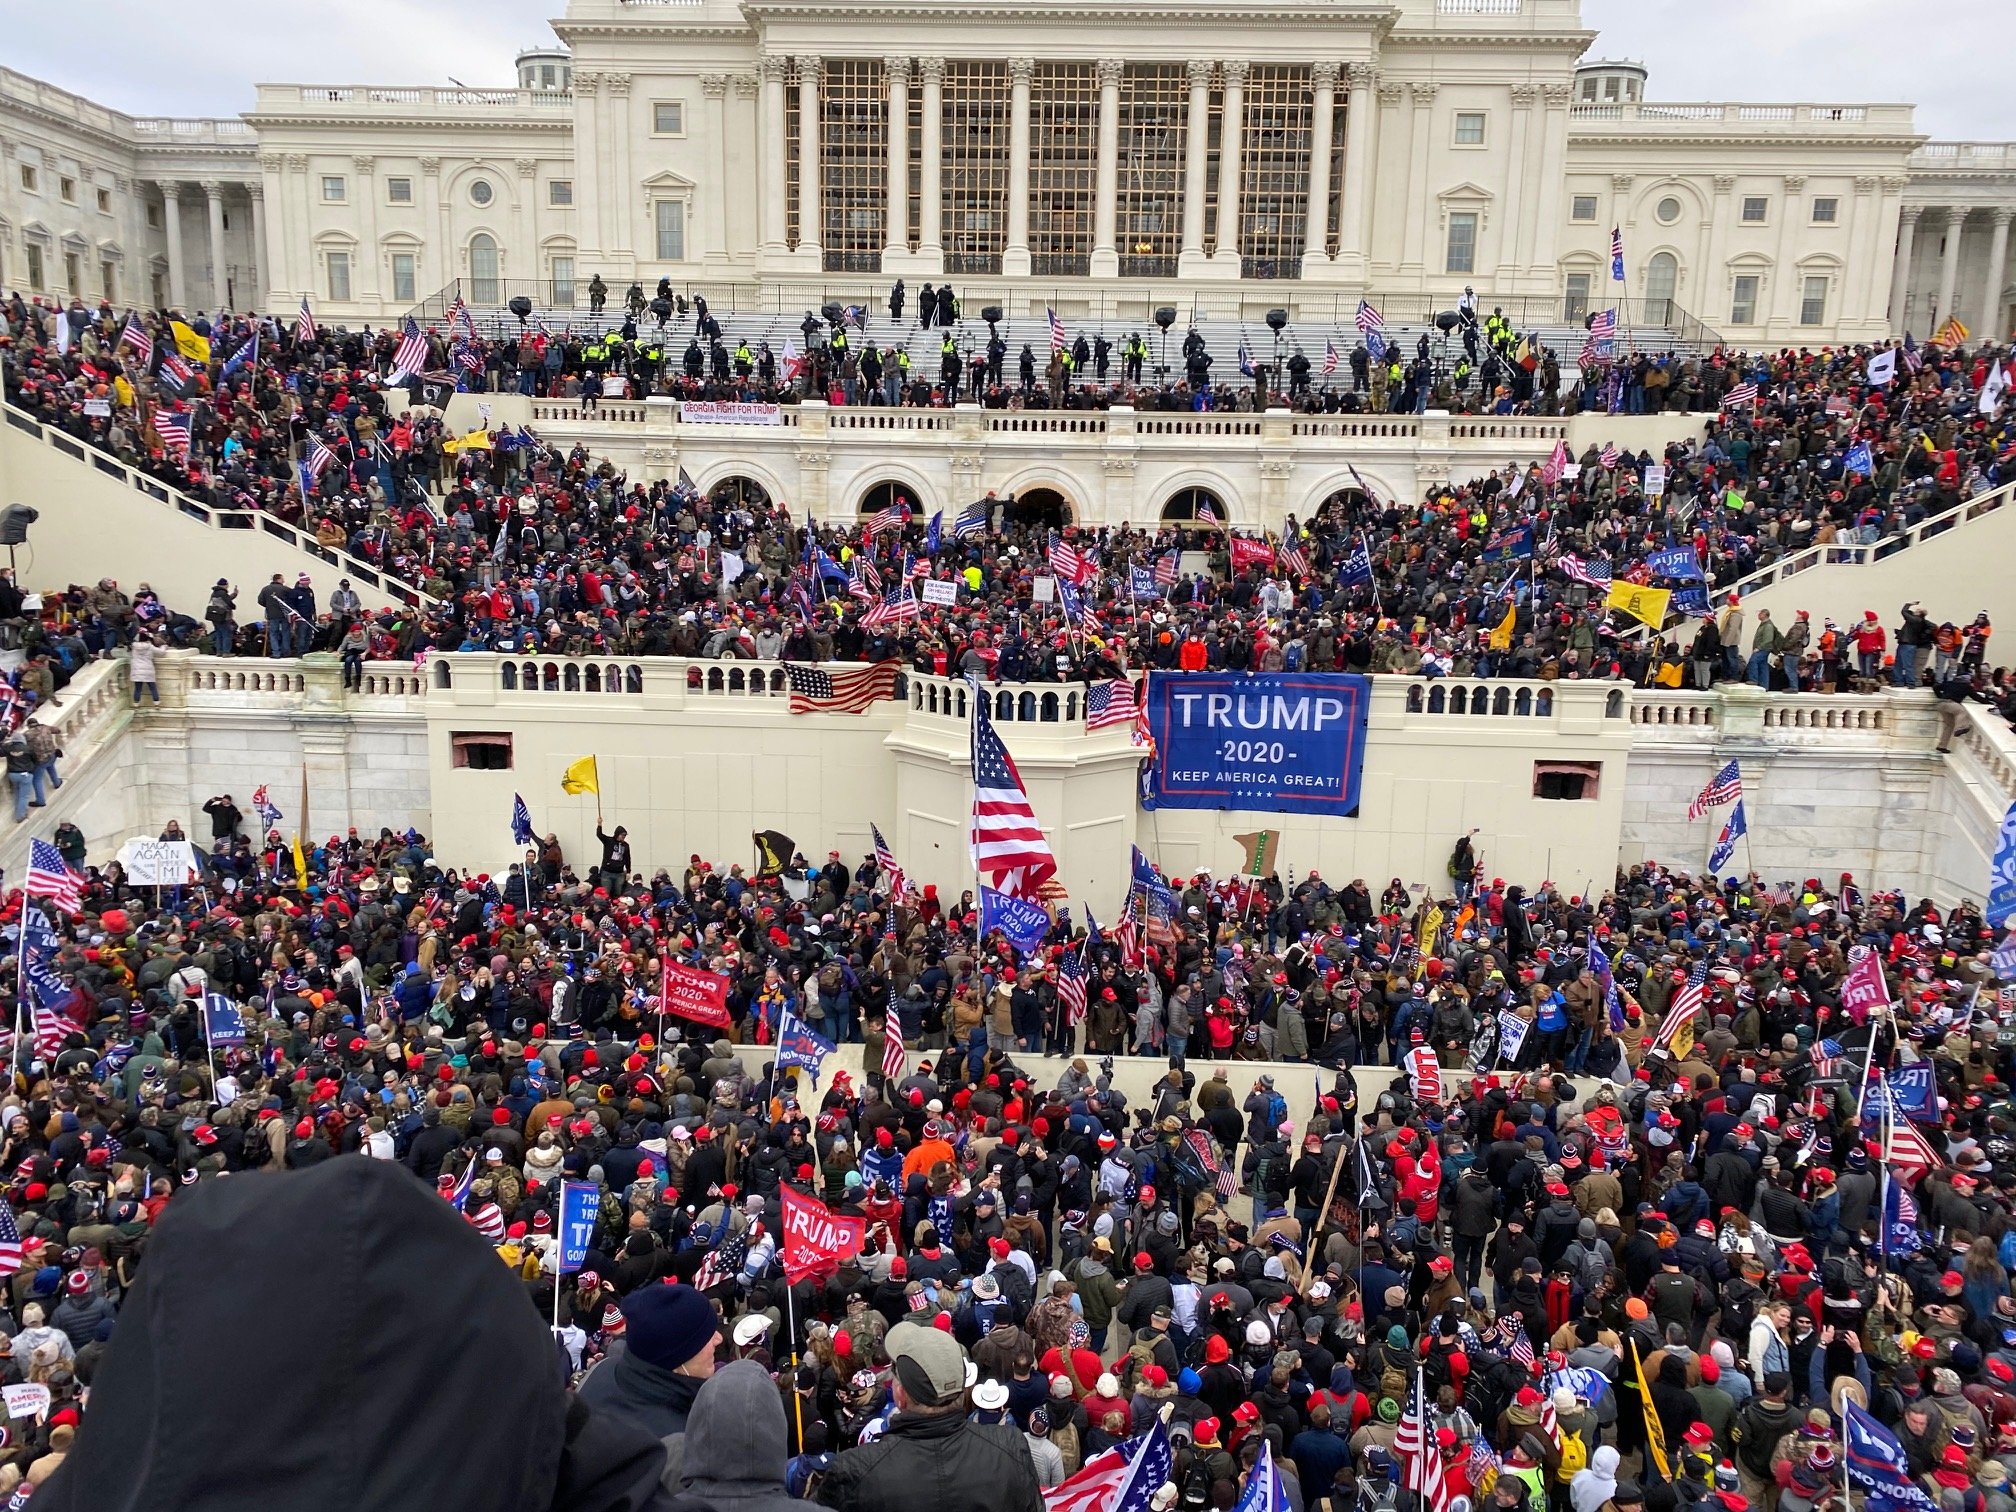 EXCLUSIVE: Witness at Capital Called Crowd “Overwhelming,
Peaceful, Beautiful Crowd” – Media Still Won’t Acknowledge Voter
Fraud 1